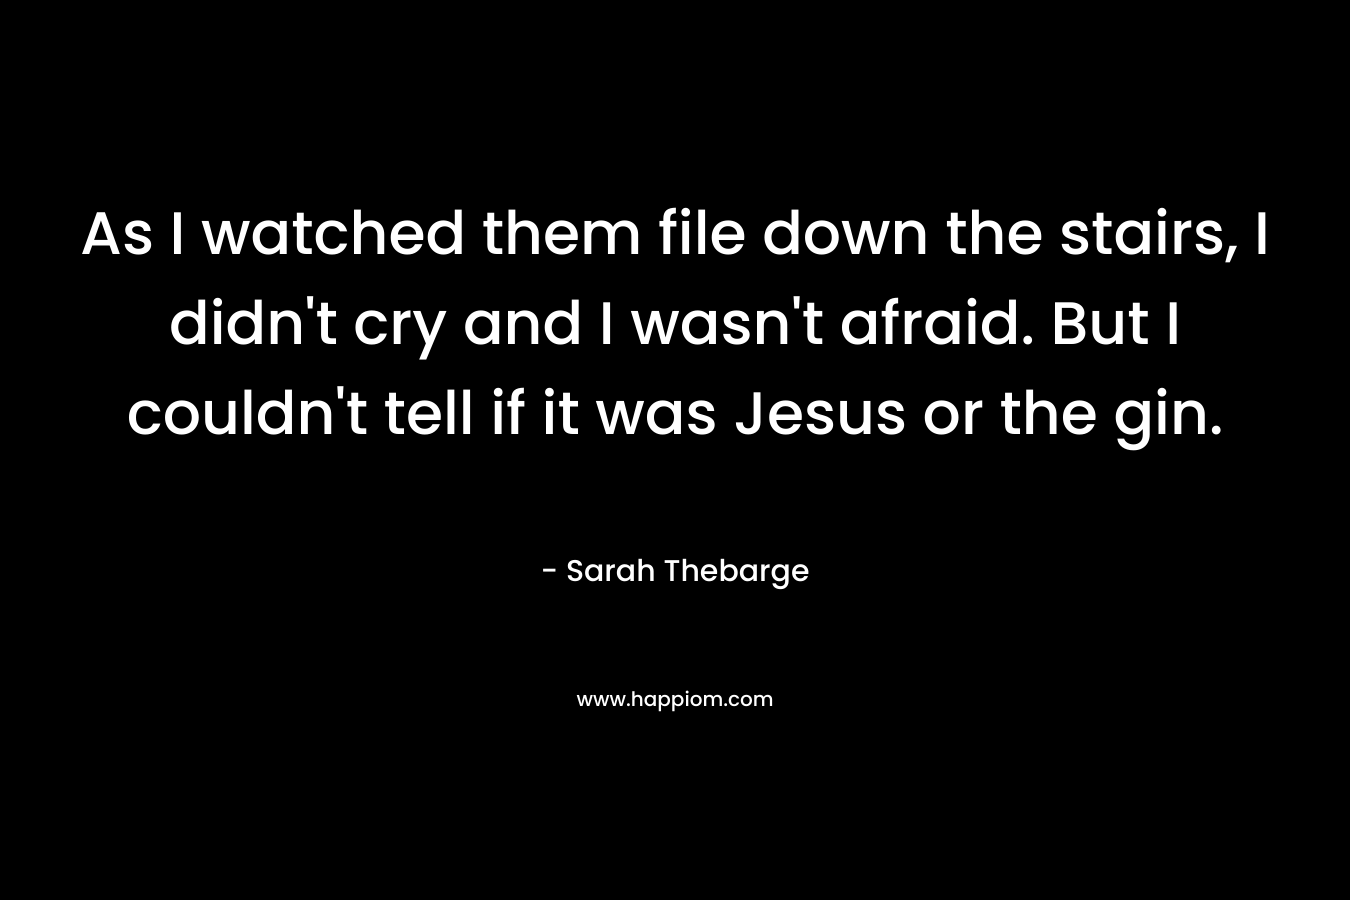 As I watched them file down the stairs, I didn’t cry and I wasn’t afraid. But I couldn’t tell if it was Jesus or the gin. – Sarah Thebarge